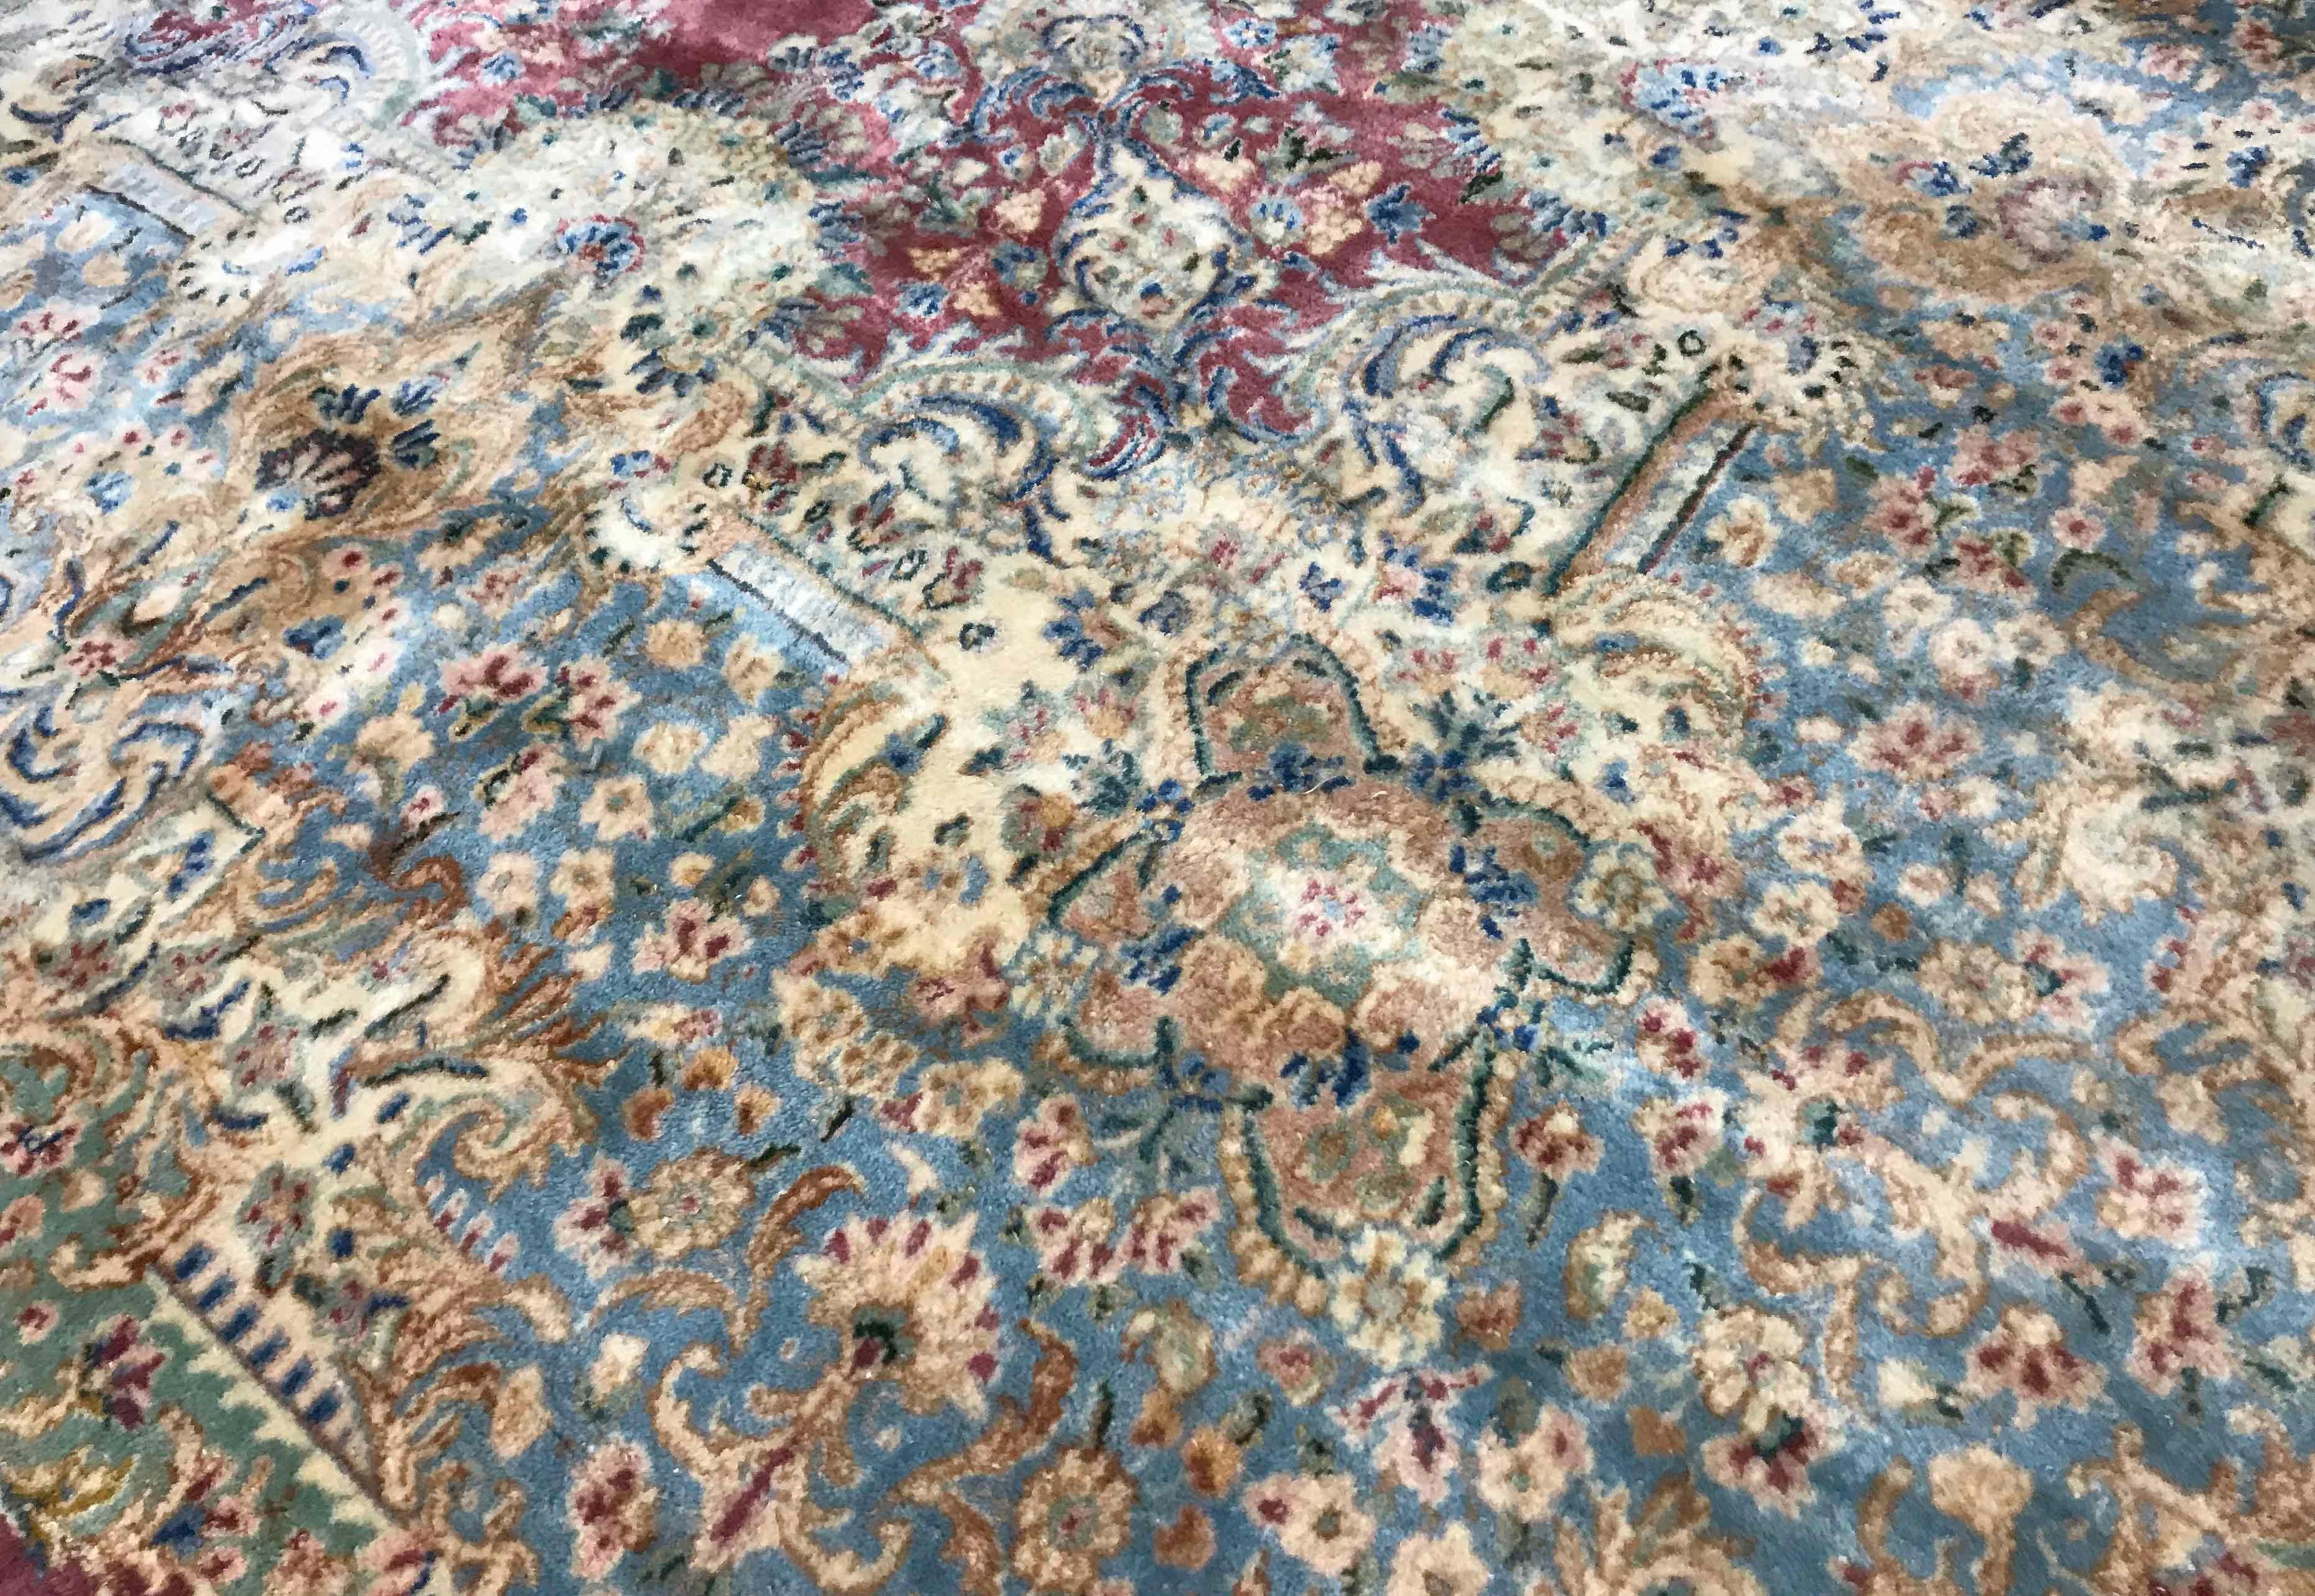 Vintage oversize Kerman rug, circa 1940. This dramatic looking oversize Kerman has a central soft plum field containing a floral design medallion all enwrapped within a soft blue and ivory border overflowing into the main design to create a look of